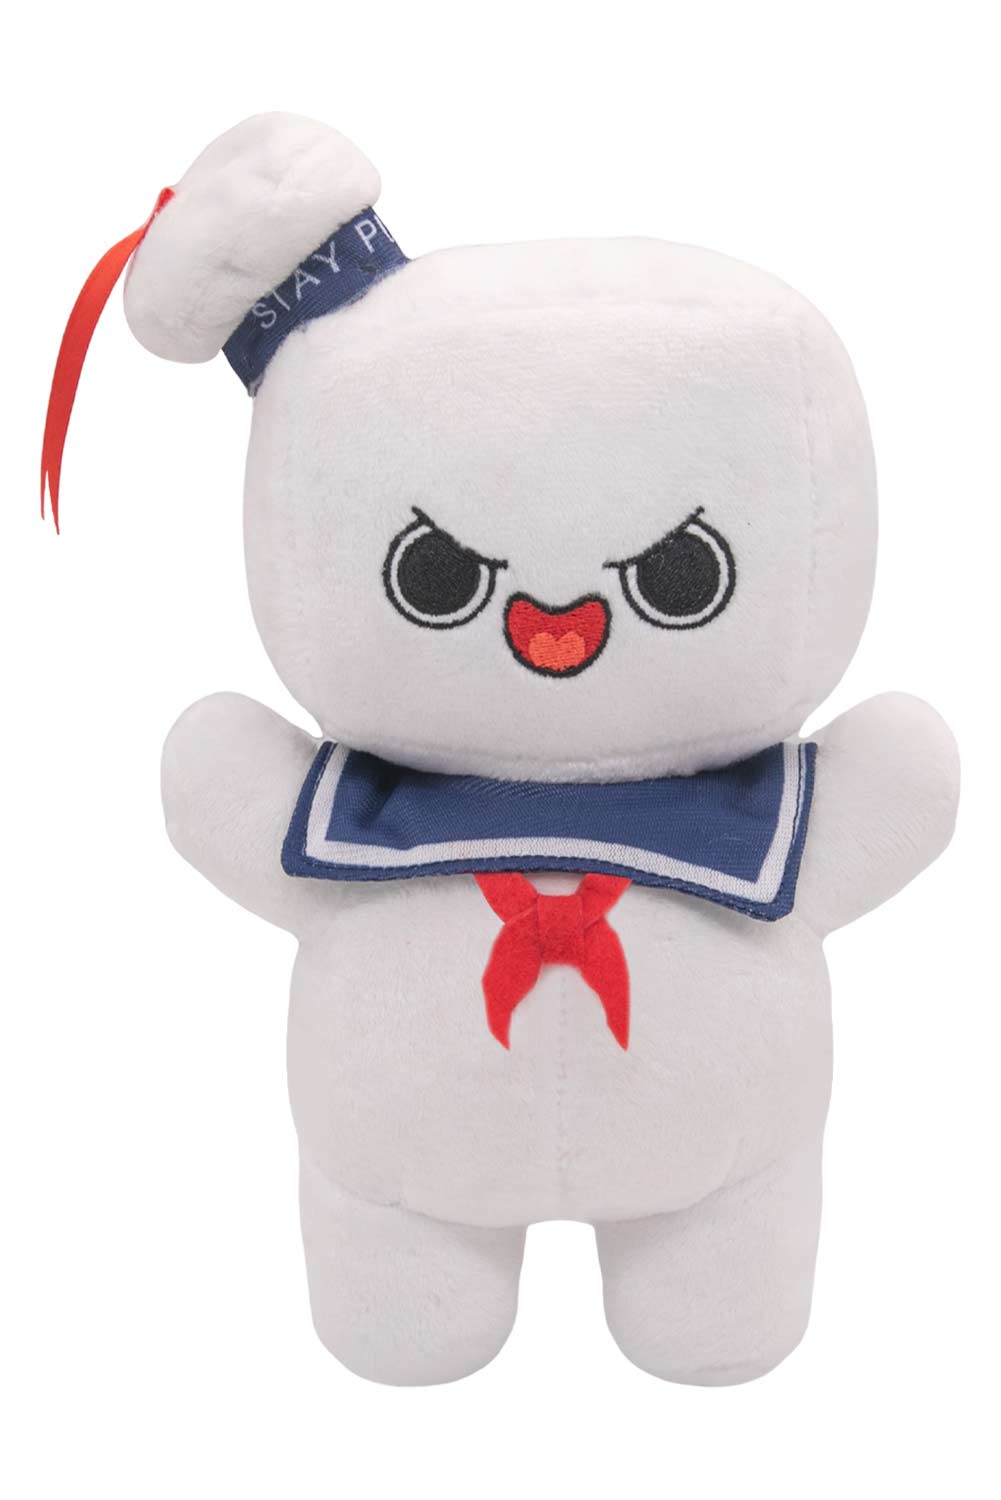 Movie Ghostbusters Candy Ghost Stay Puft Marshmallow Man Cosplay Plush Toys Cartoon Soft Stuffed Dolls Halloween Accessories